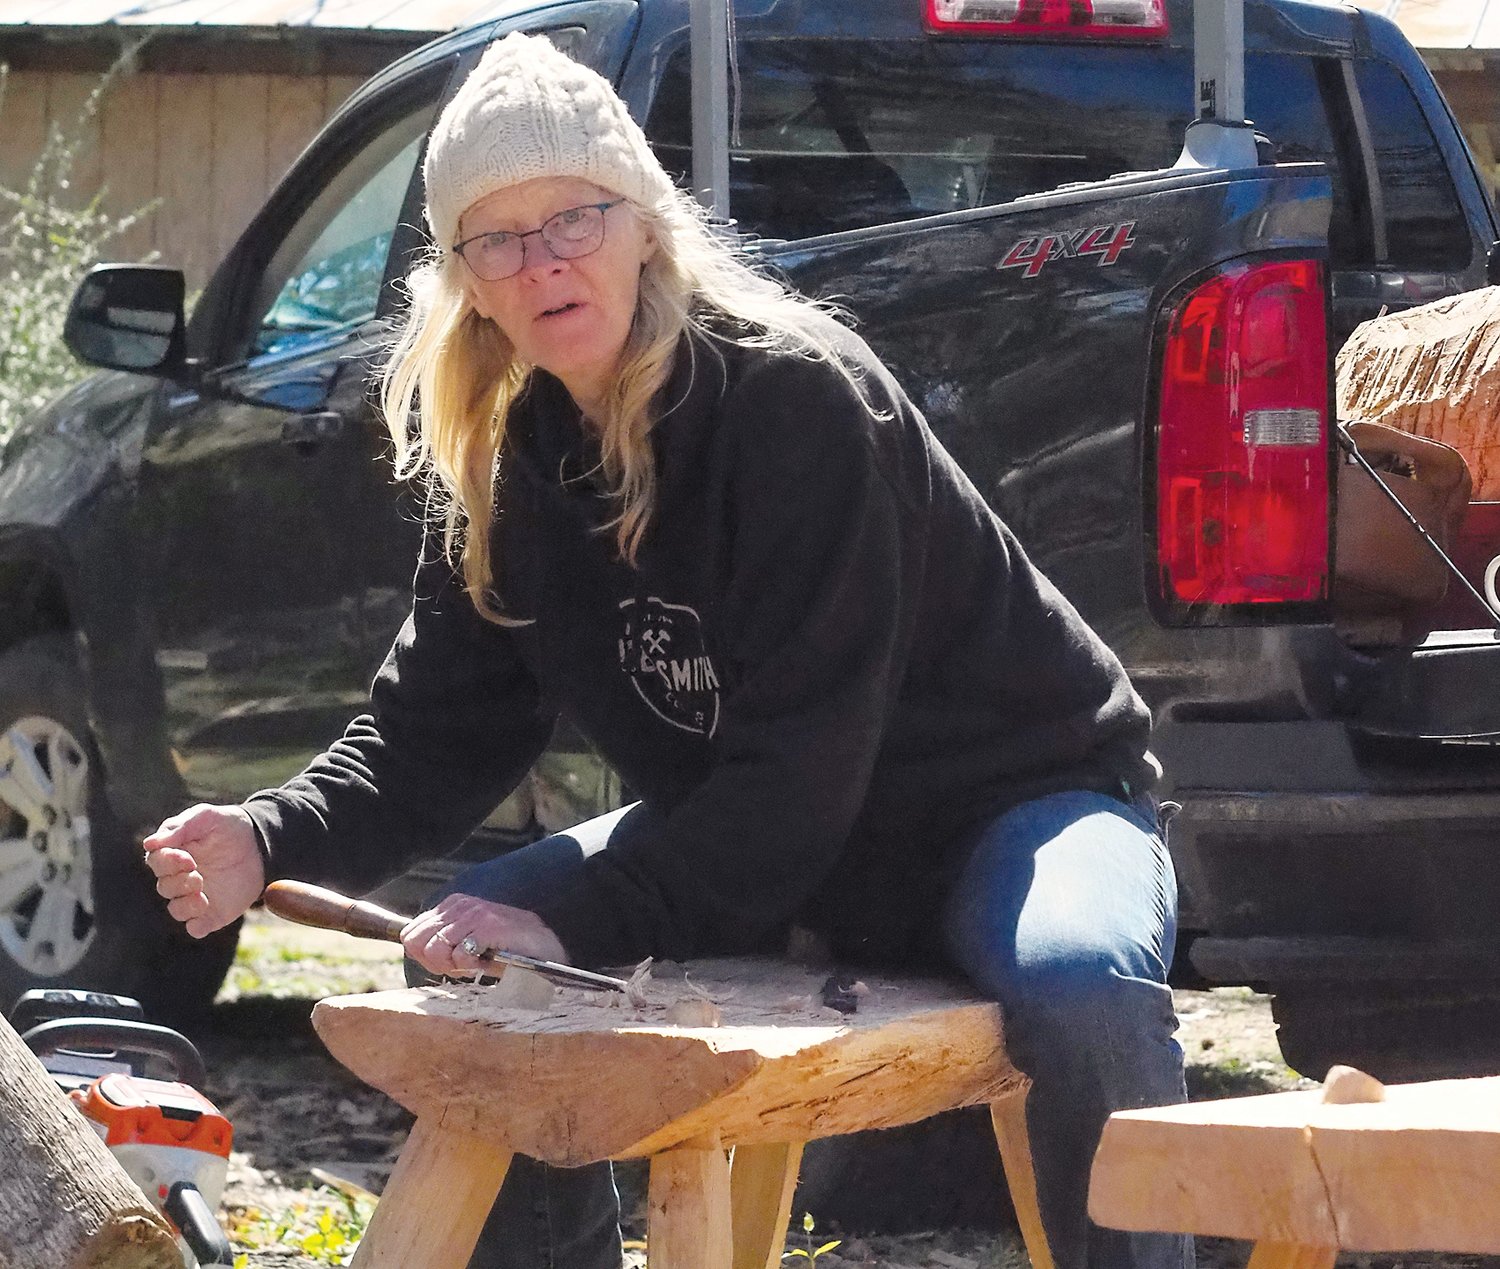 Festival organizer Cara OConnell is shown here practicing the art of woodworking.